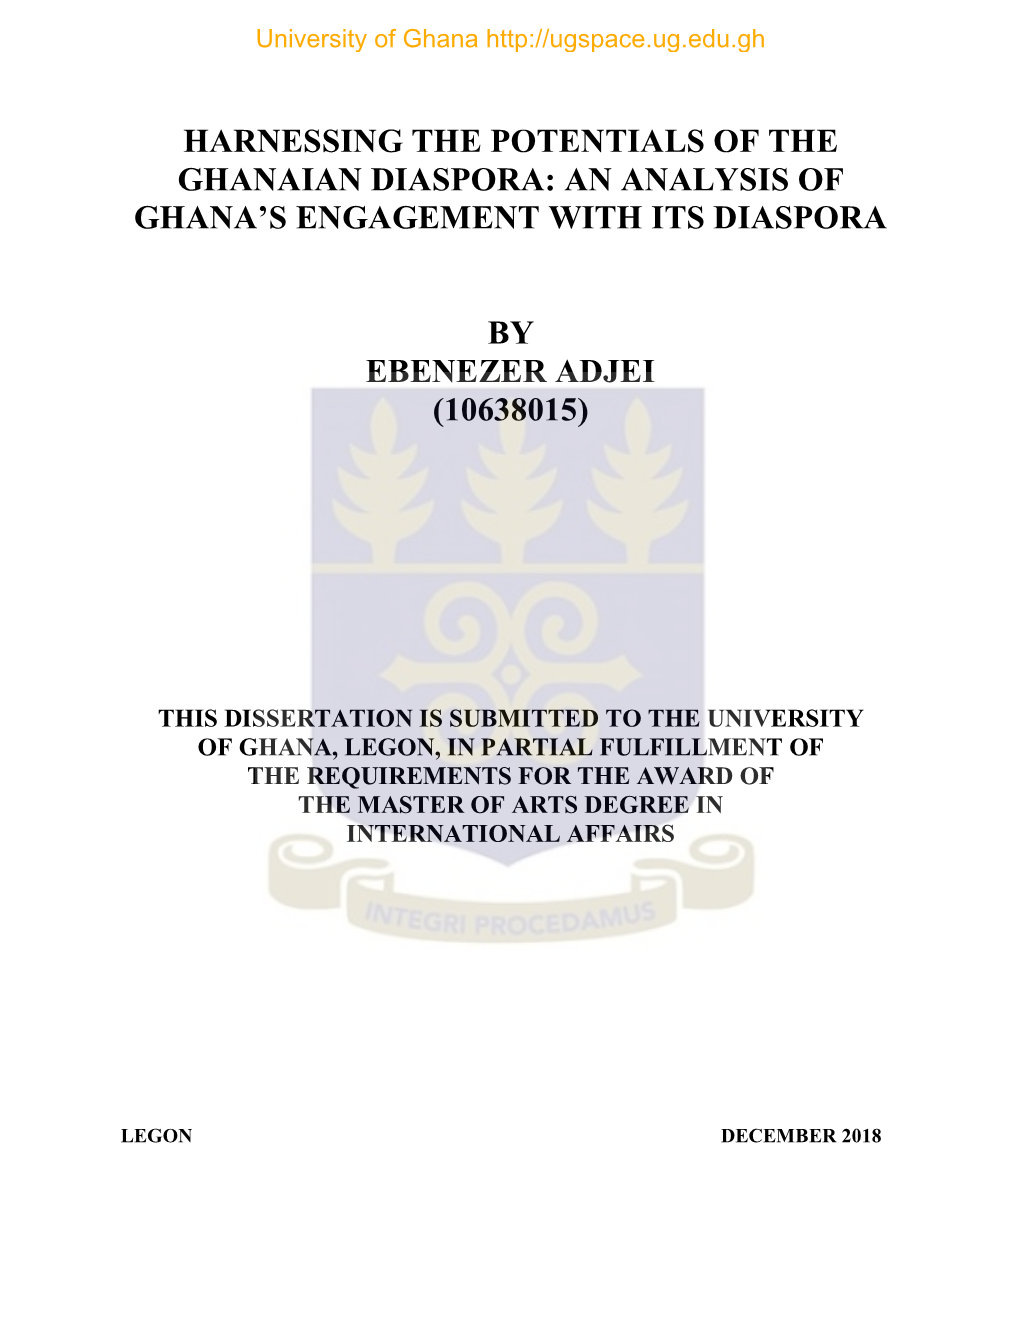 Harnessing the Potentials of the Ghanaian Diaspora: an Analysis of Ghana’S Engagement with Its Diaspora